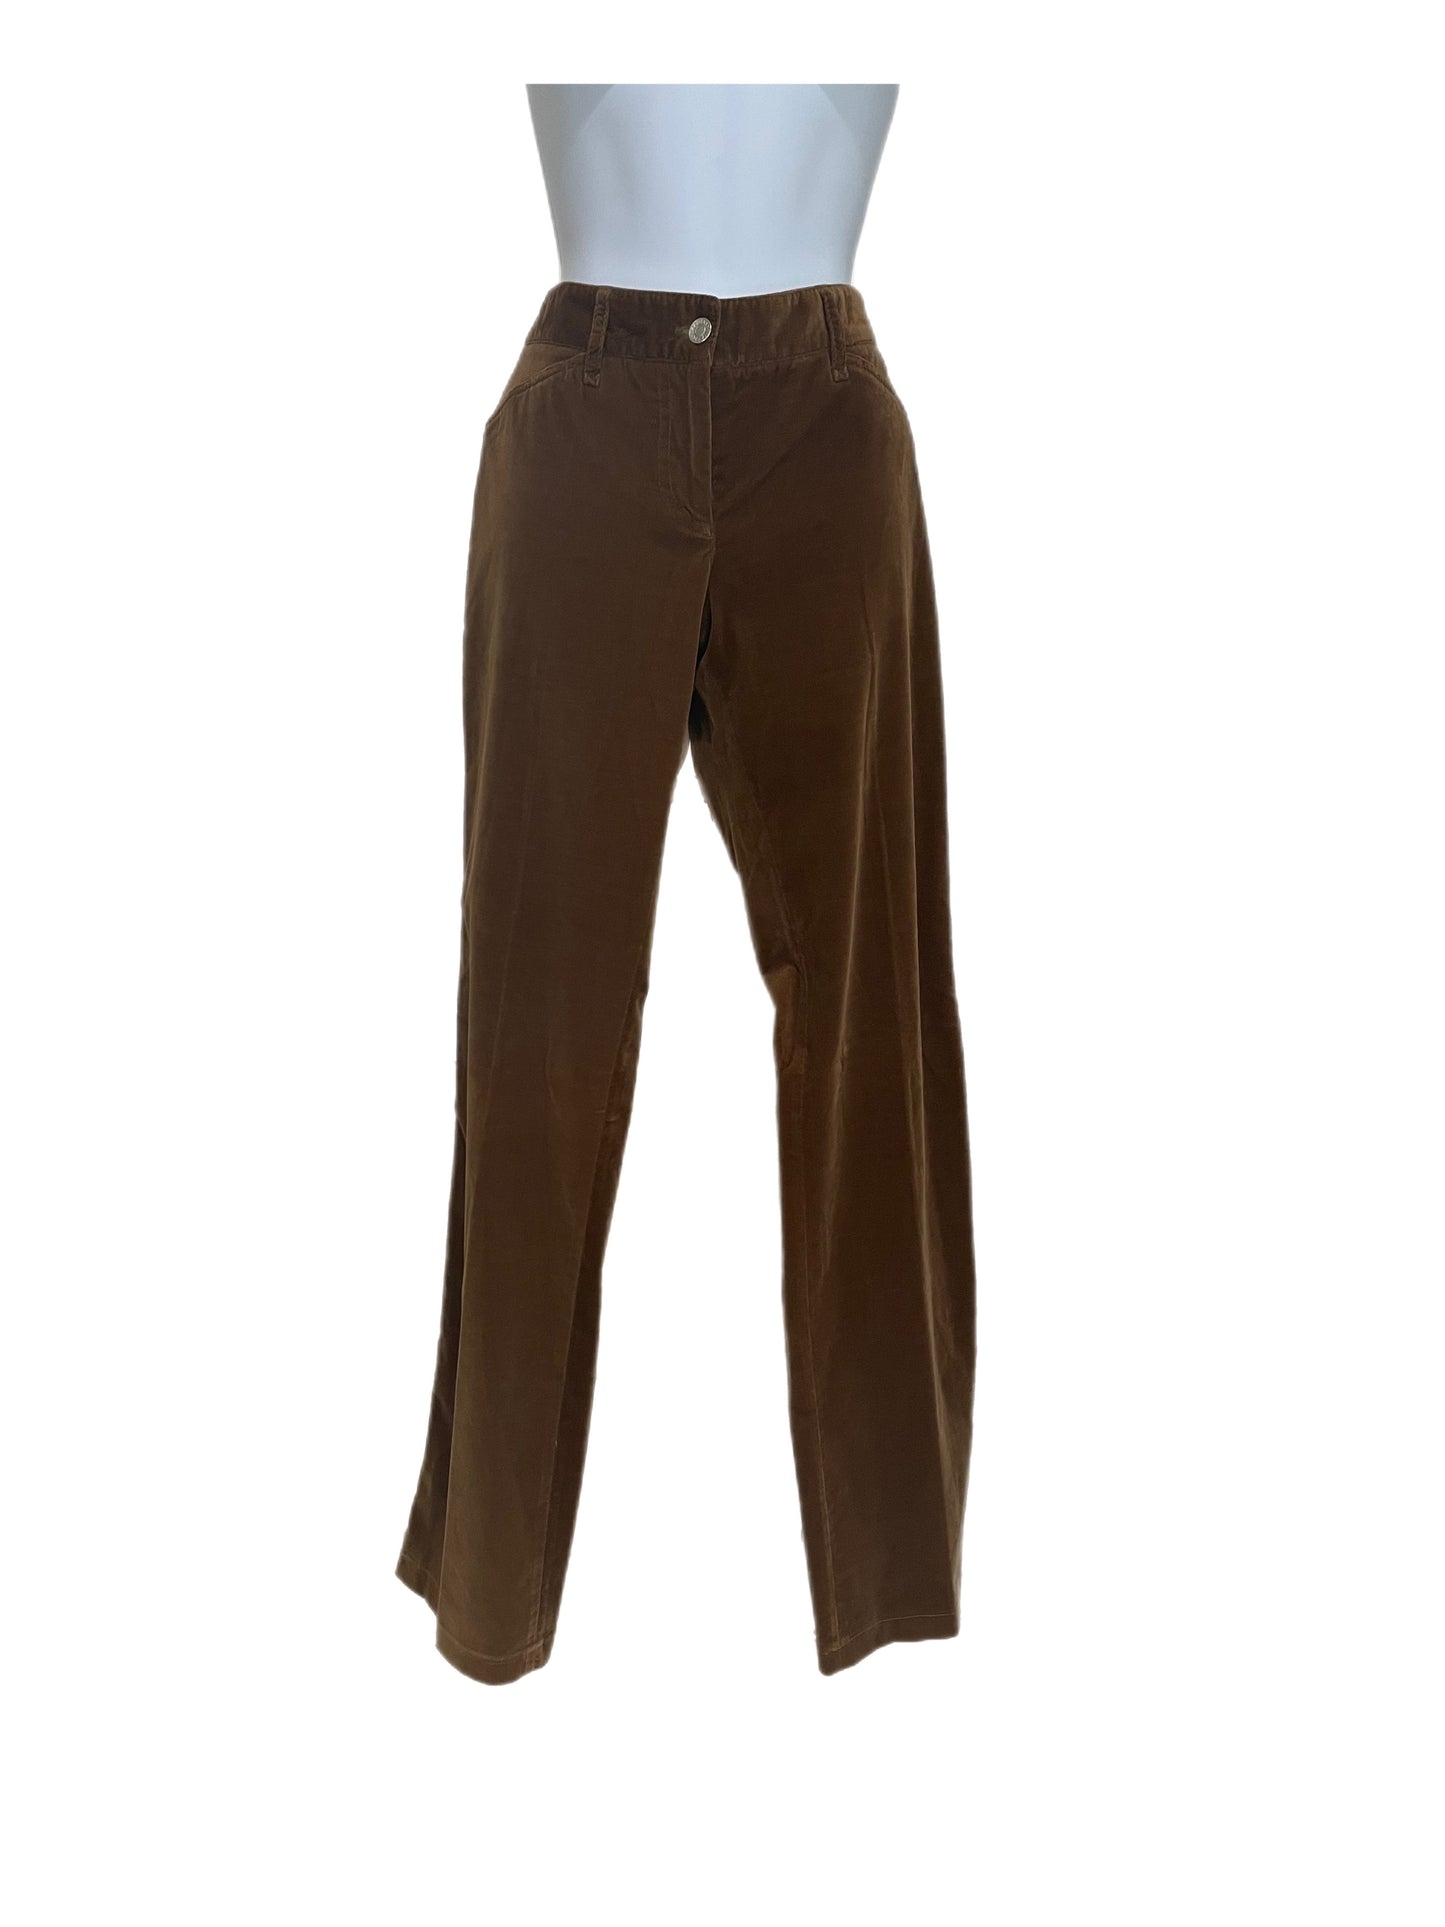 Pants-Brown Suede - By Dolce & Gabbana